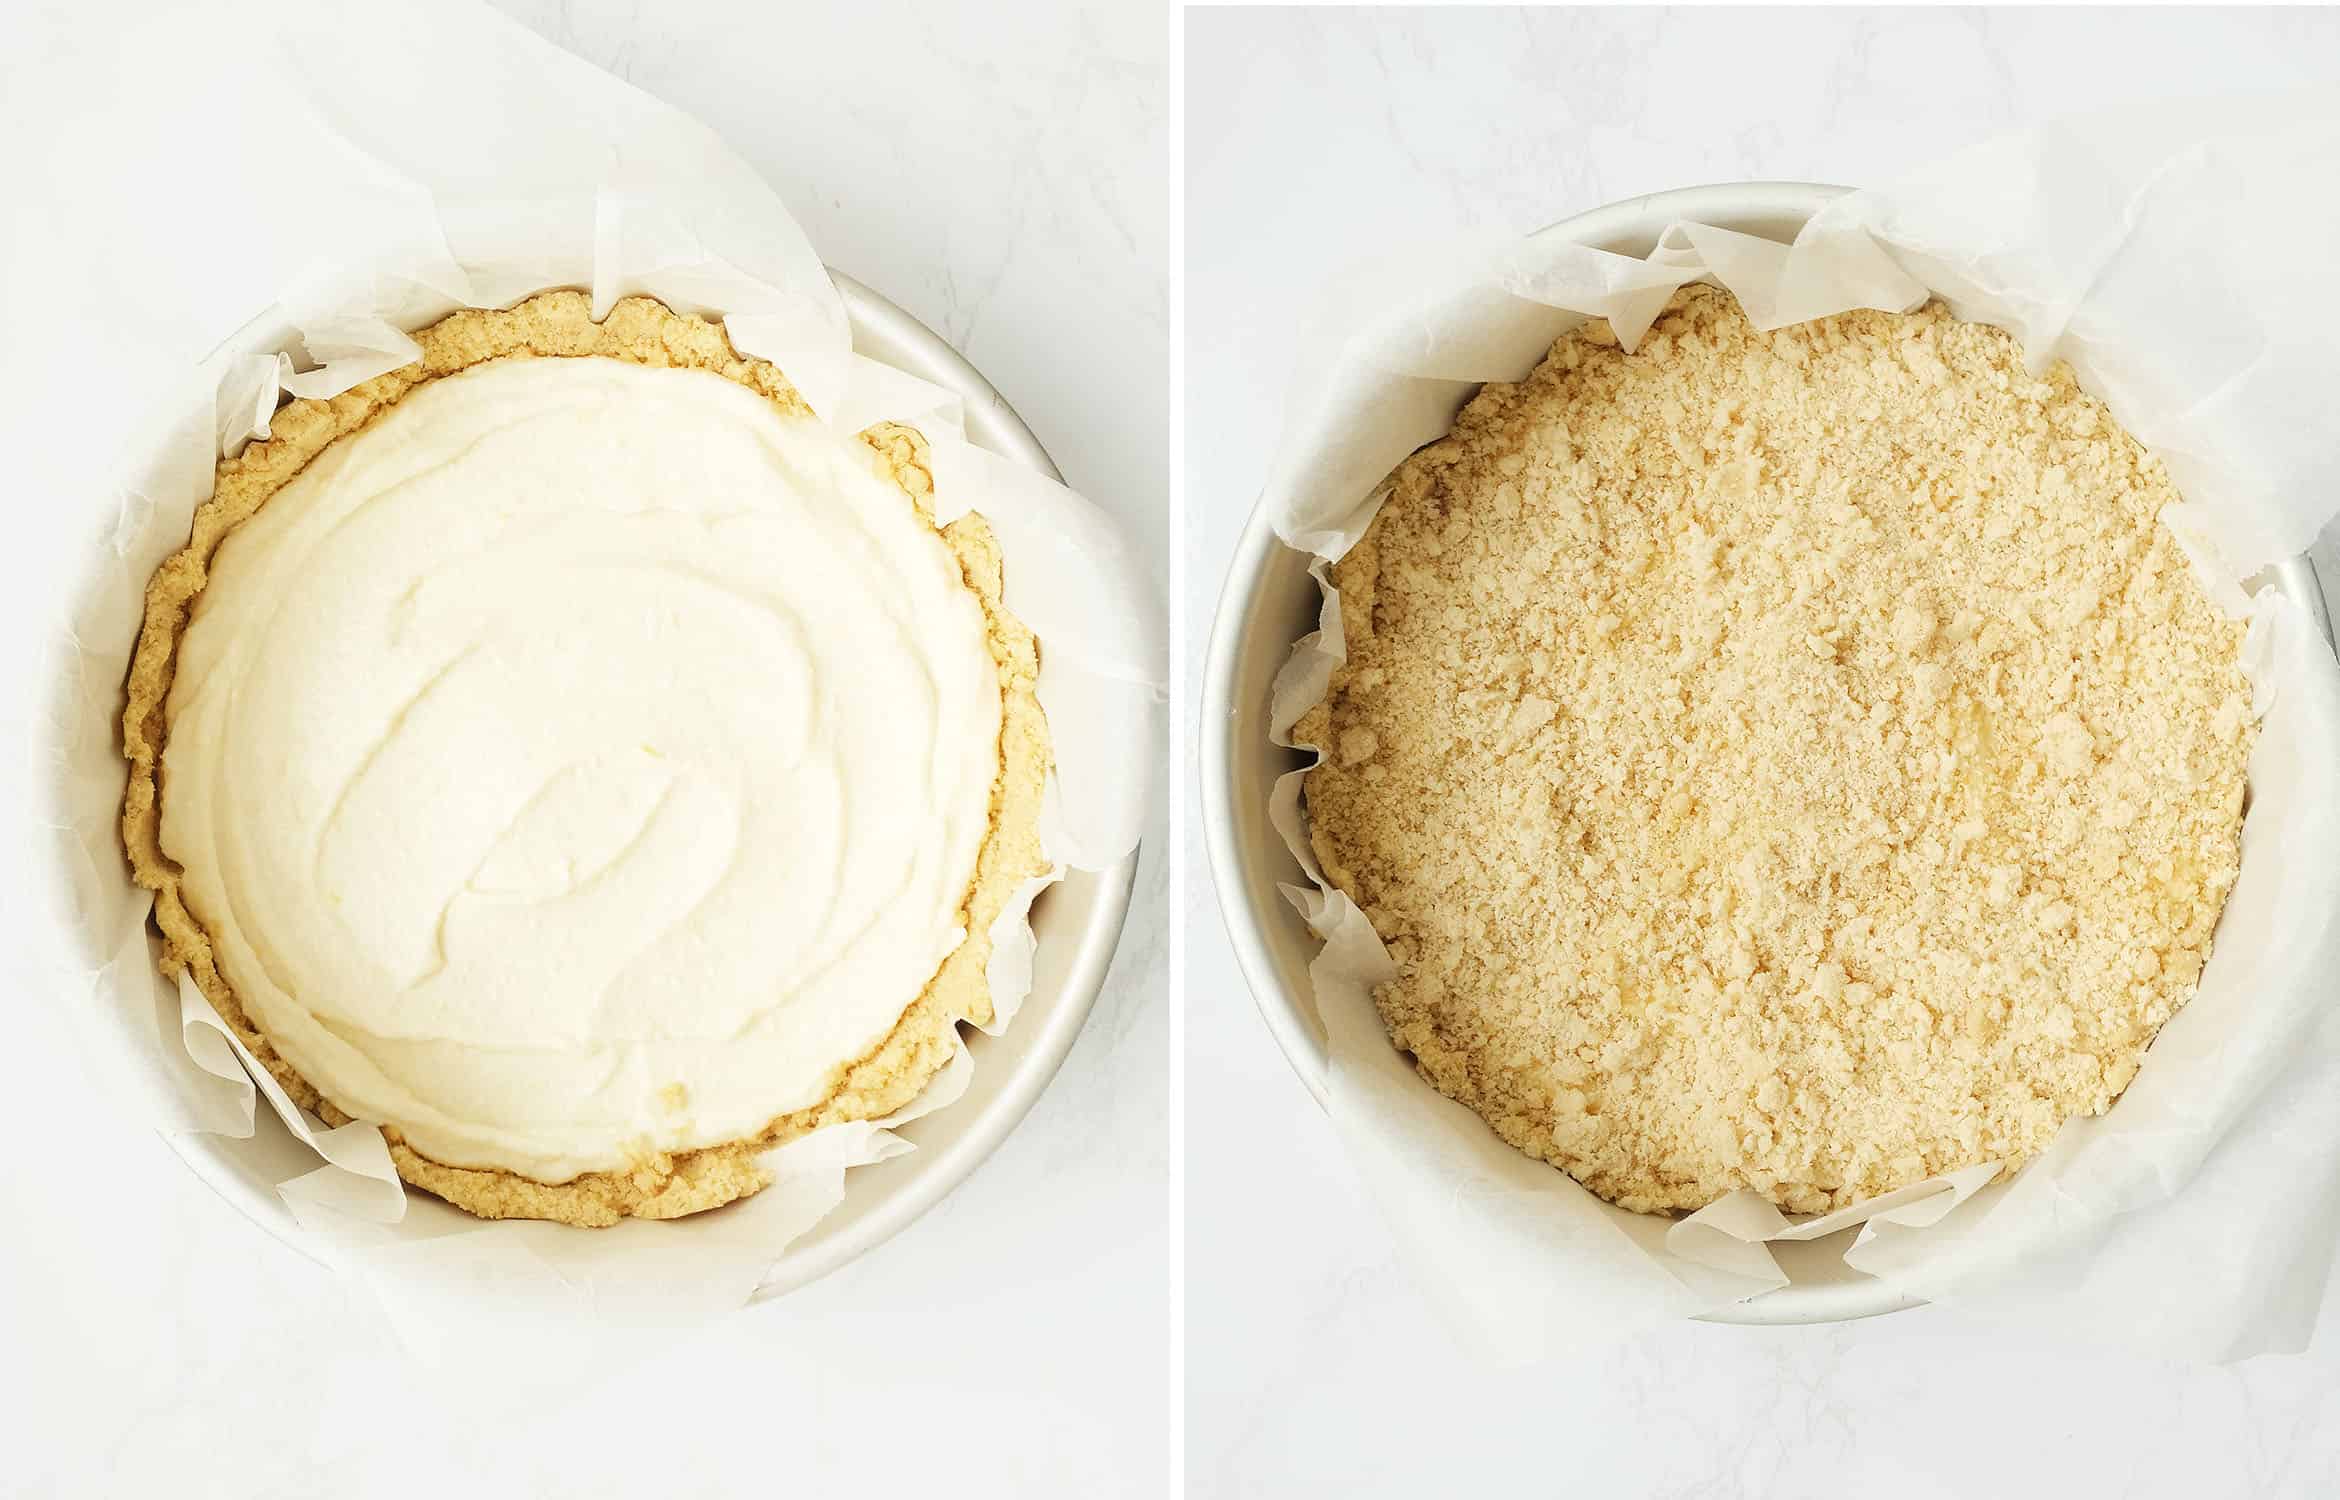 Two images showing how to spread the ricotta mixture and how to scatter the crumbles over the ricotta cake.